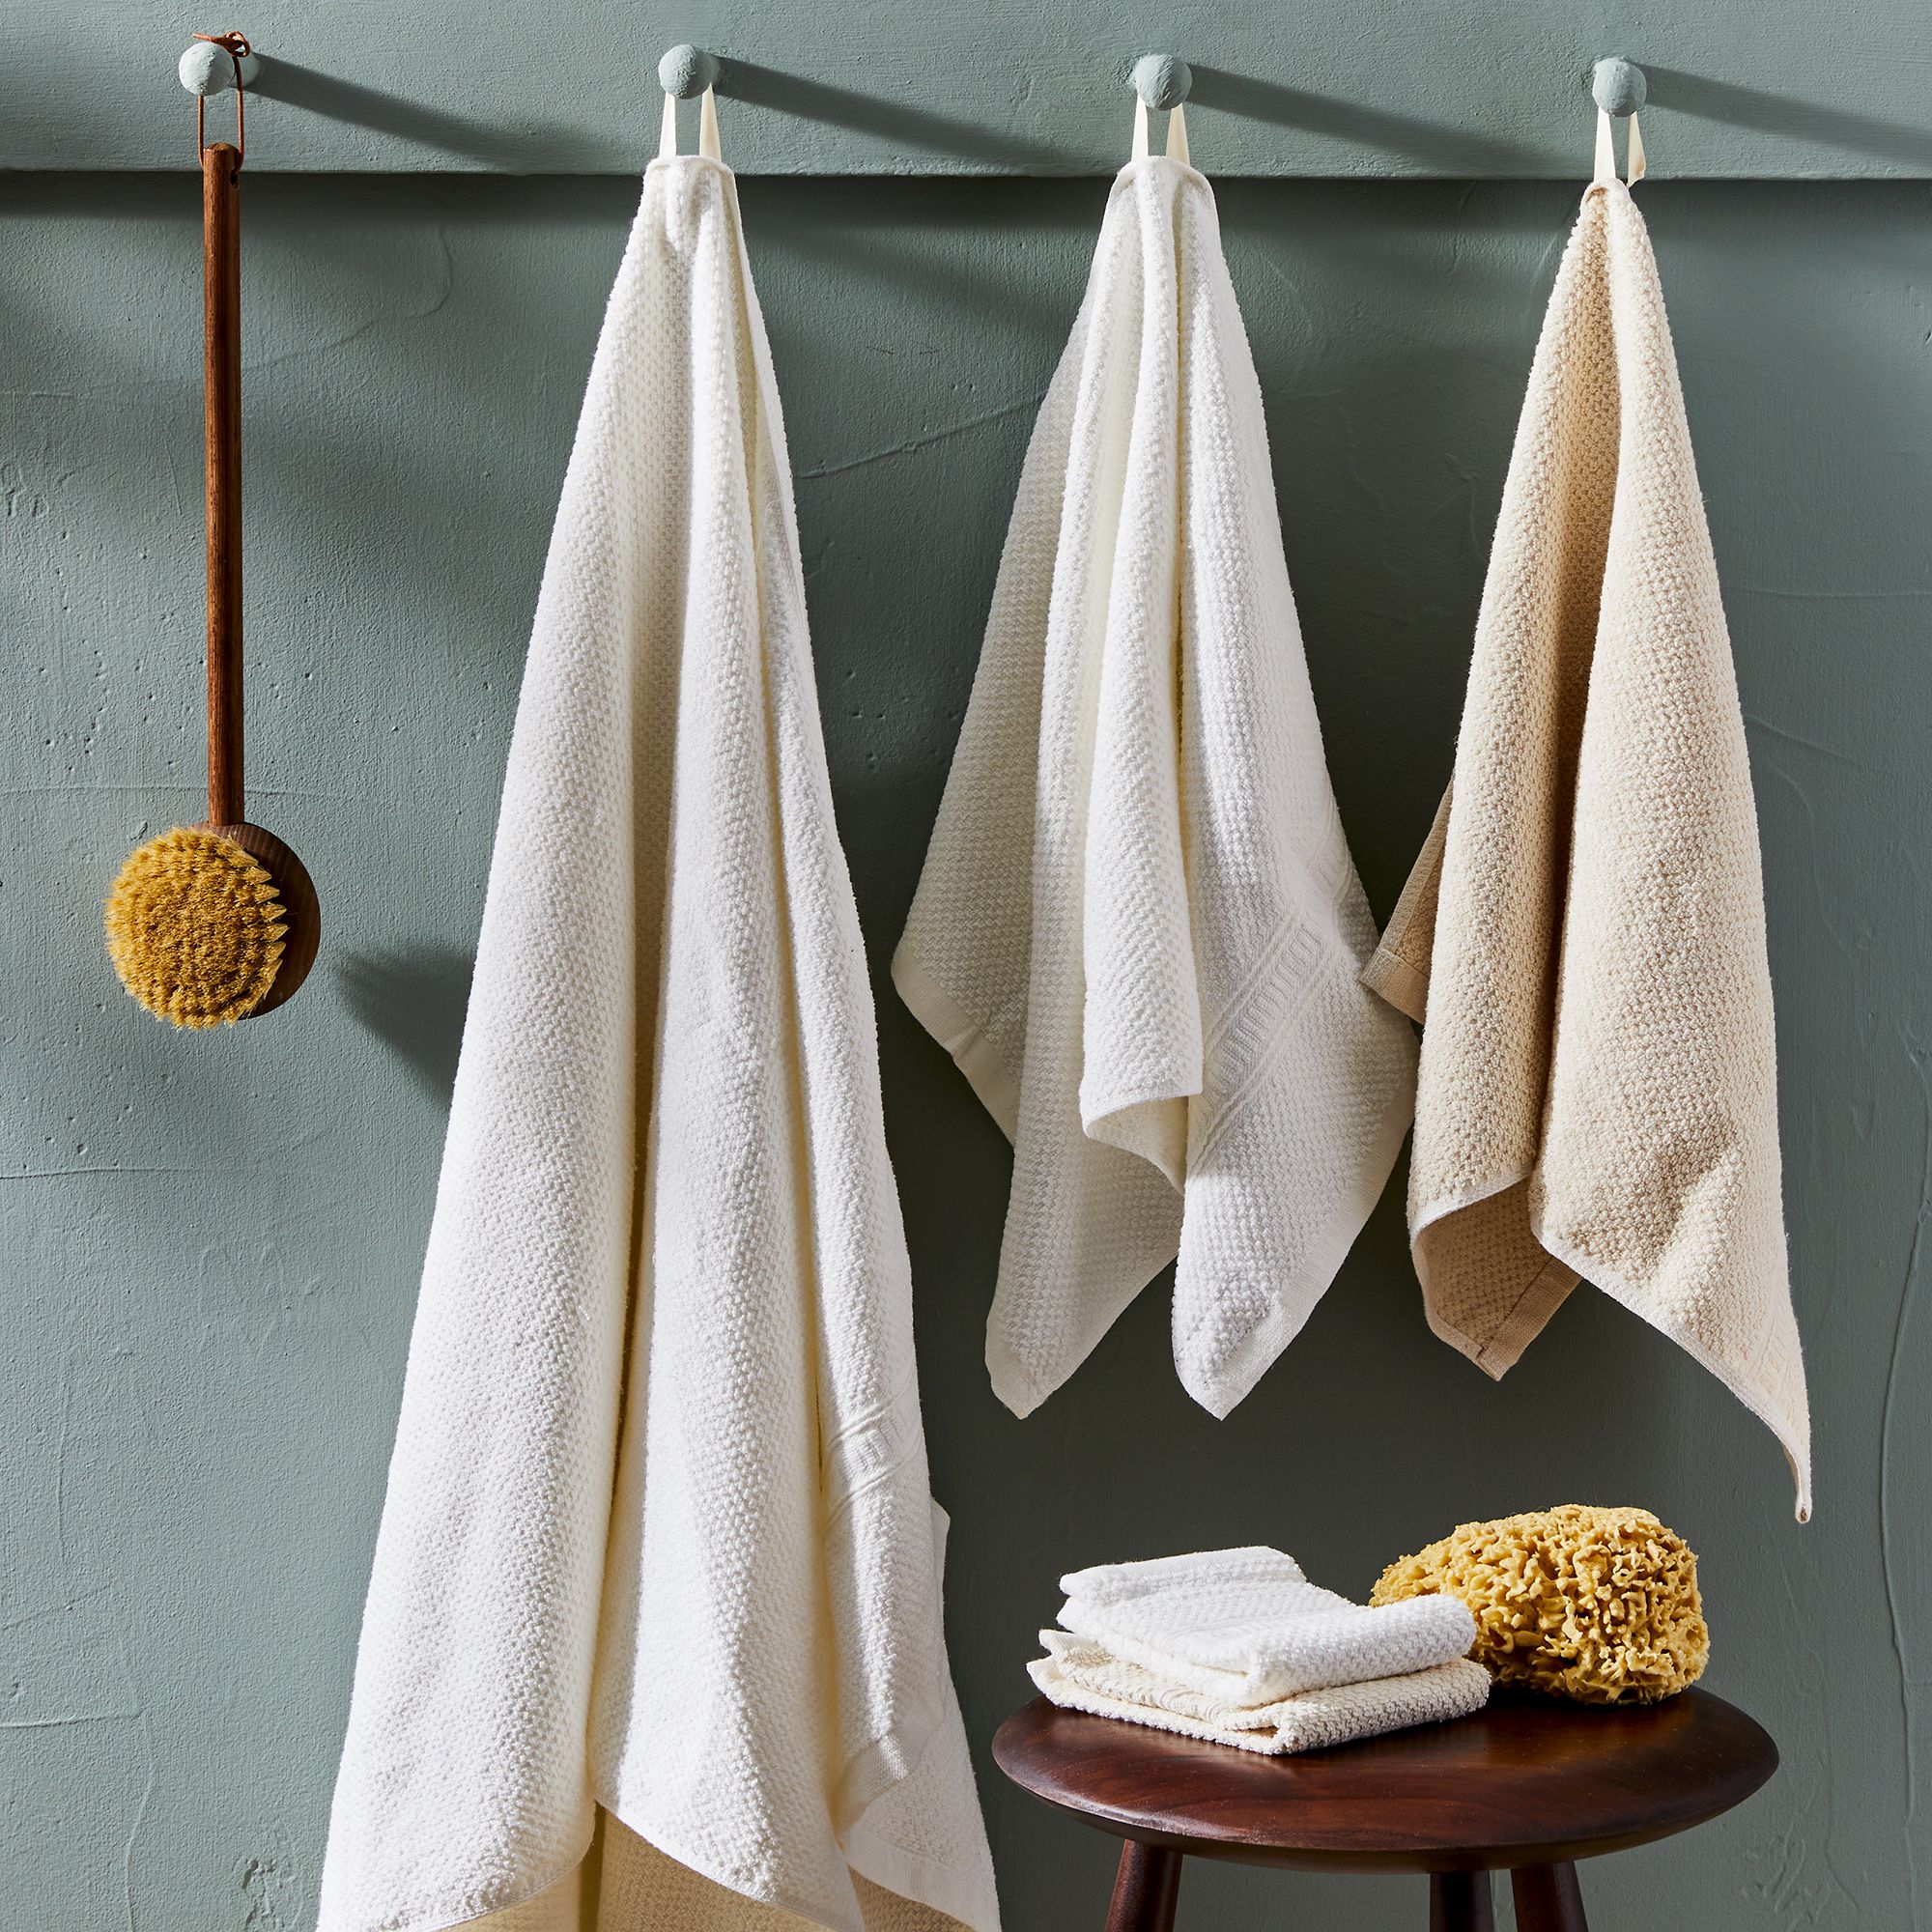 Top 5 things to look out for when looking to buy new eco-friendly towels